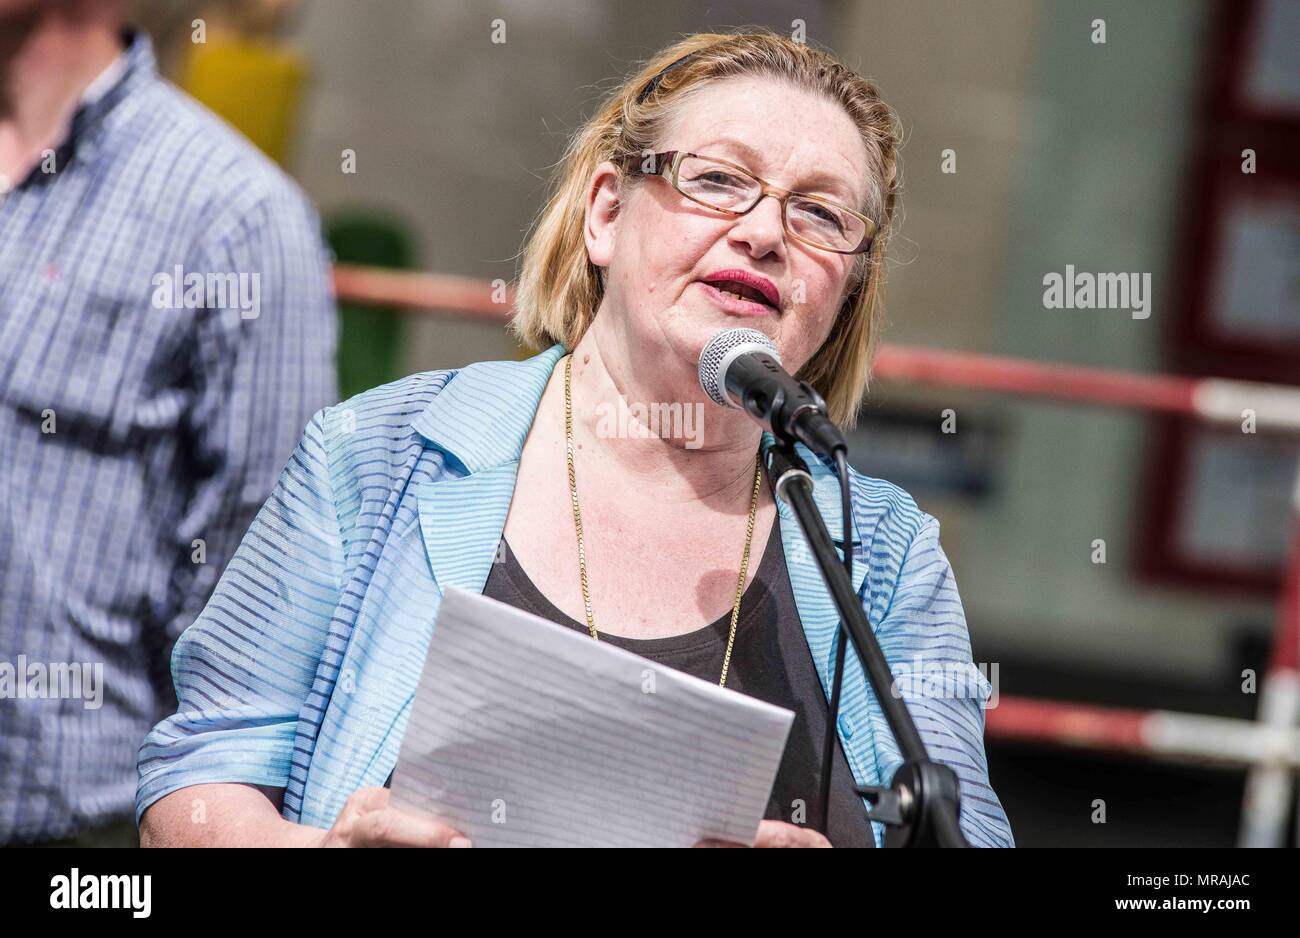 Munich, Bavaria, Germany. 26th May, 2018. Renate Werlberger. Held by party member Renate Werlberger, the neo nazi NPD (National Demokratische Partei) party held a rally in the Munich city center in order to expose themselves to potentially thousands of passers-by and tourists. Frank Auterhoff was invited from Franken as speaker. One participant had criminal charges filed by police for allegedly giving a three-finger neo nazi sign. Credit: Sachelle Babbar/ZUMA Wire/Alamy Live News Stock Photo